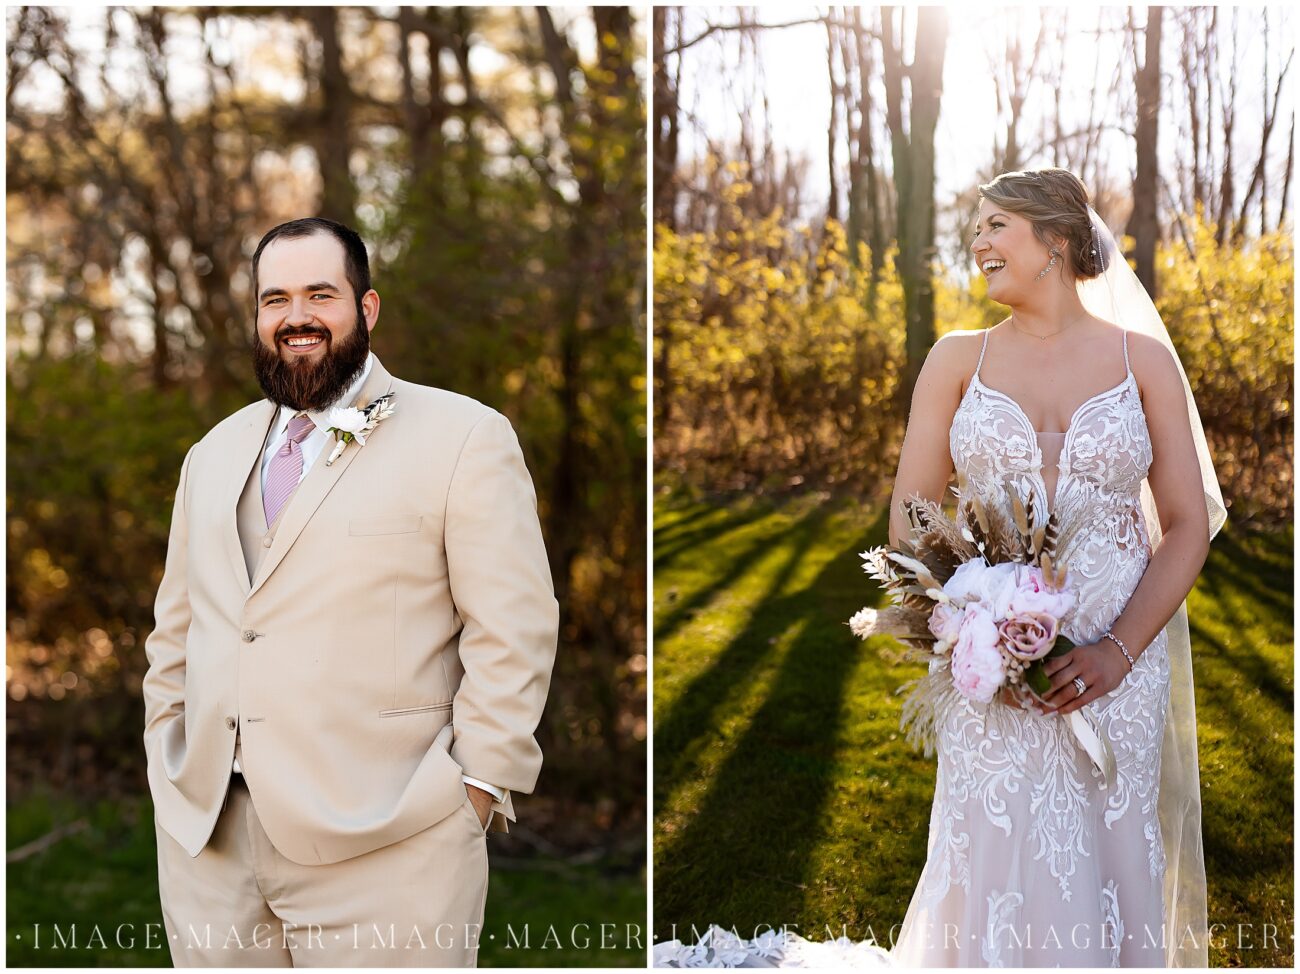 A small town wedding for Casey and Adam. A collage of two images. The first of the groom posing for the camera by himself and the second of the bride posing for the camera by herself.

Saint John the Baptist Catholic Church, L'erable, IL. 

Photo taken by Mager Image Photography.